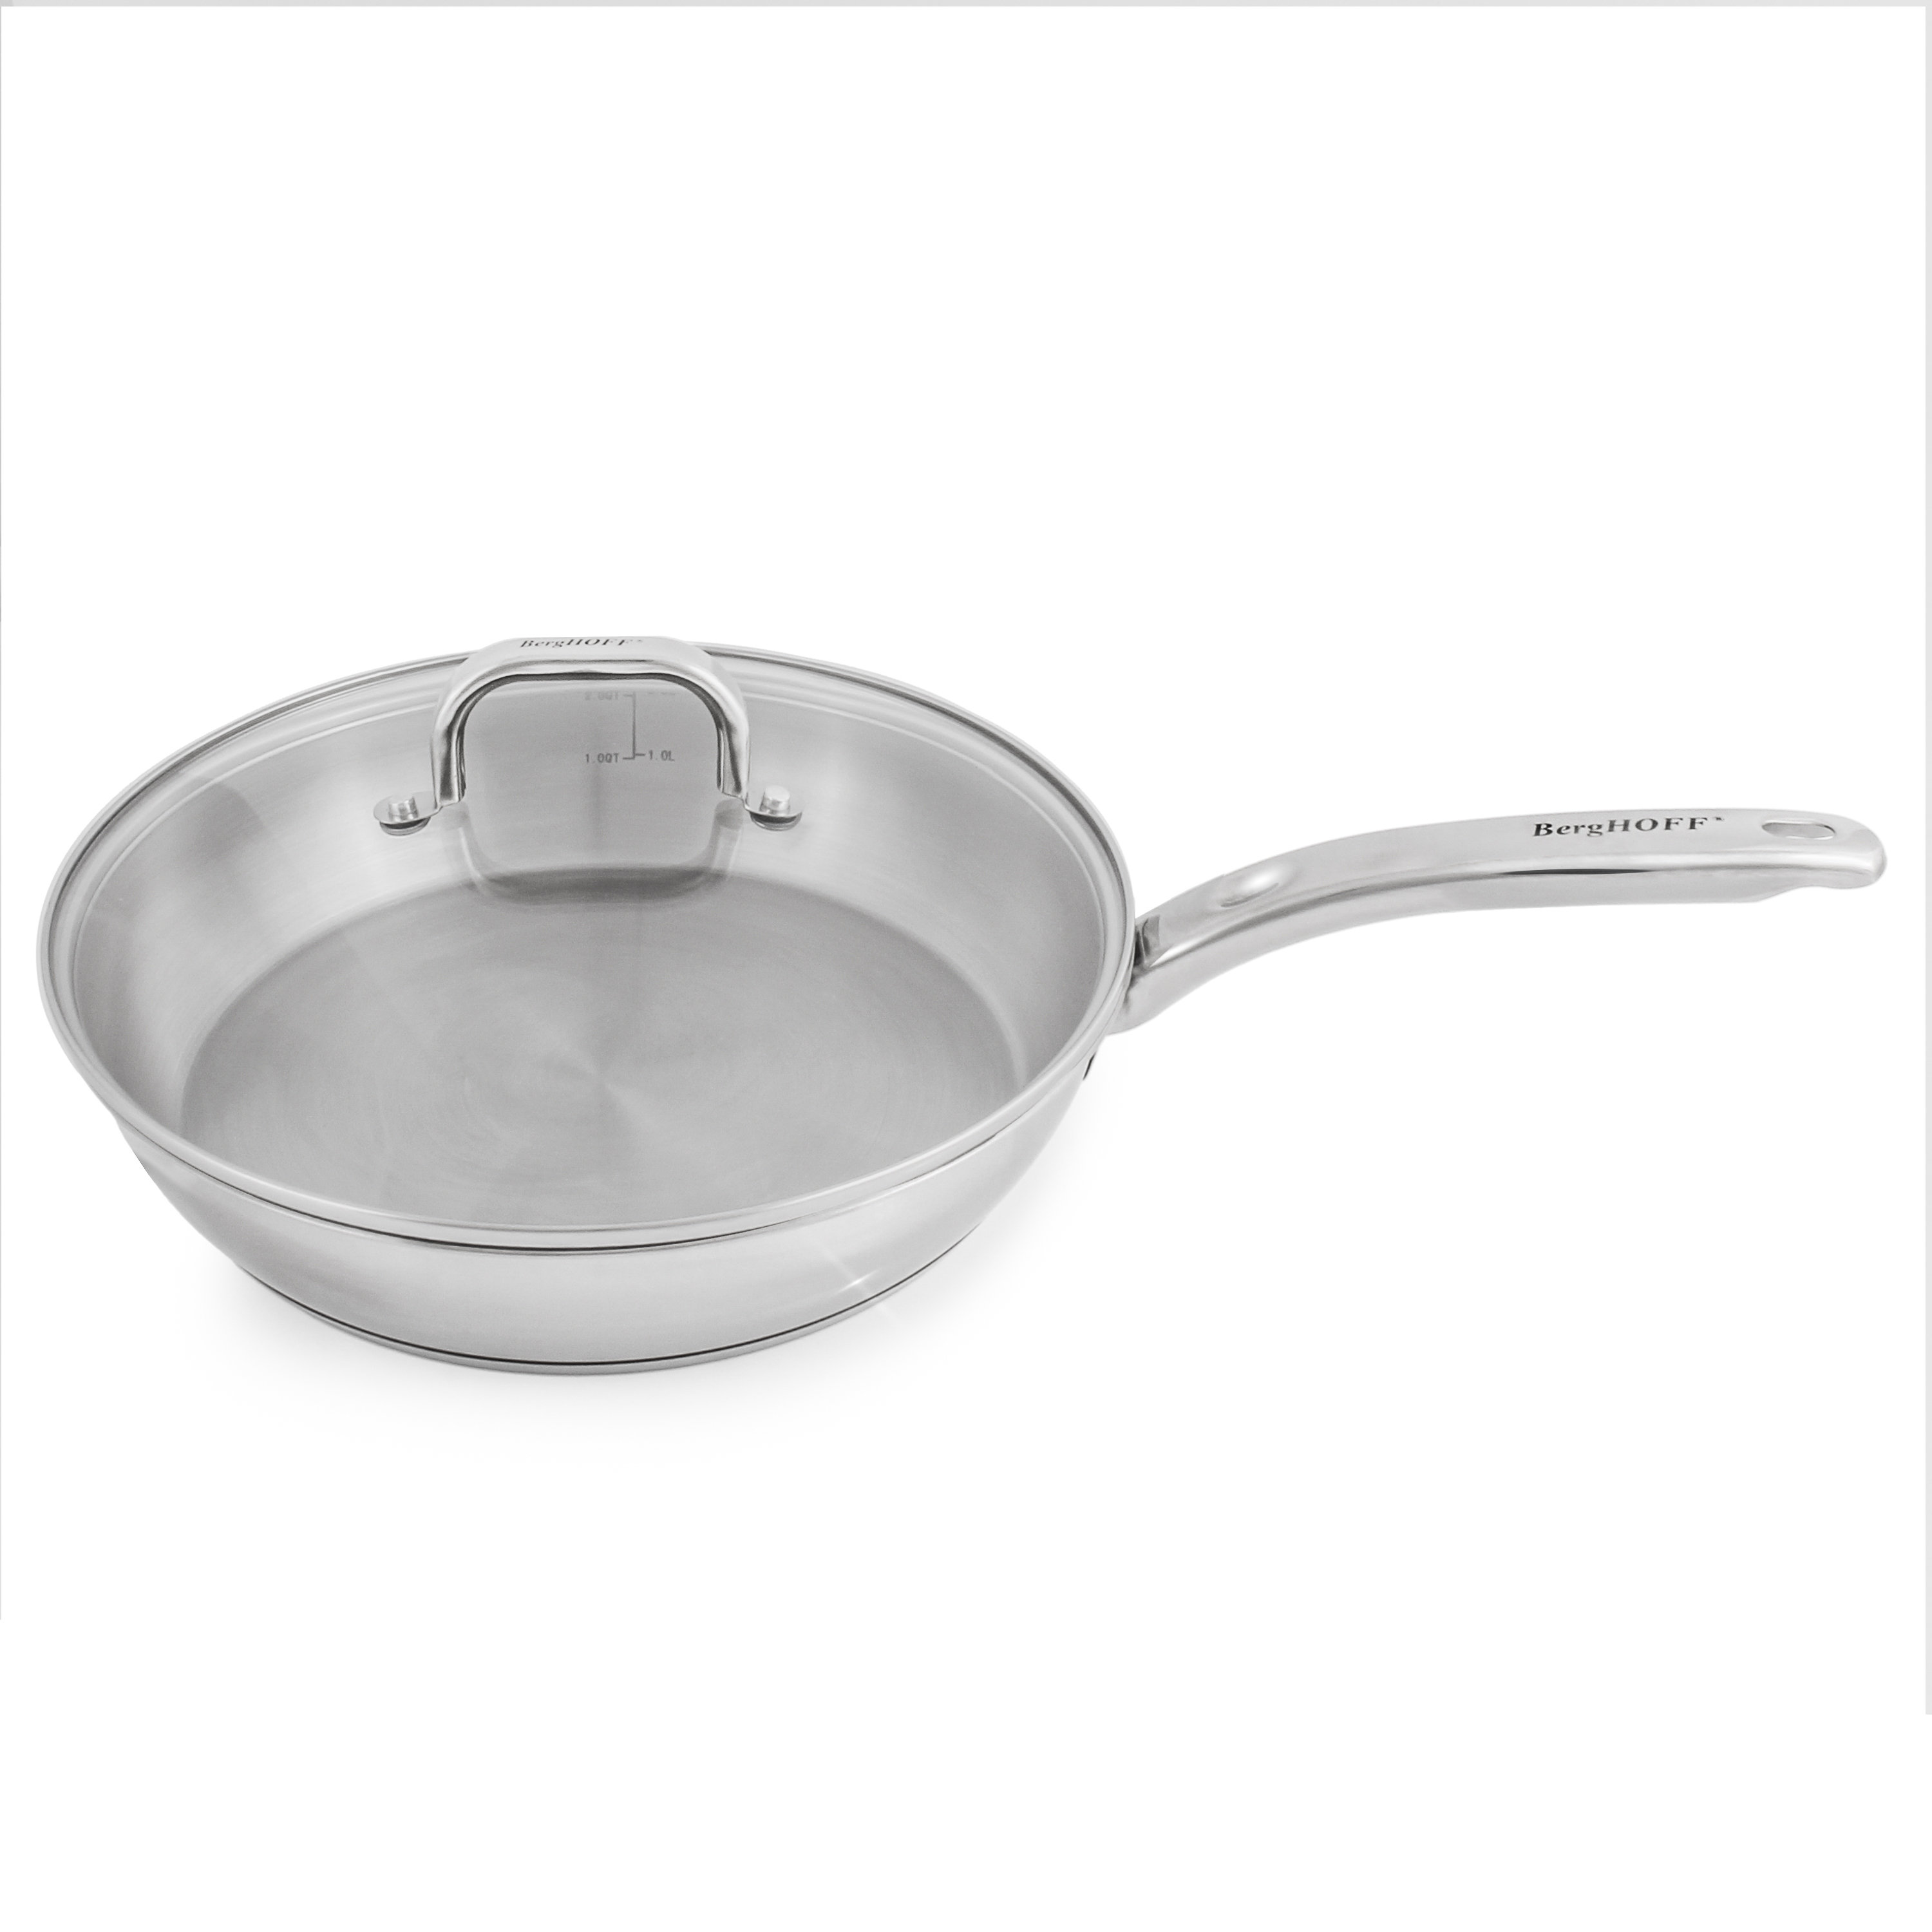 10 Stainless Steel Earth Pan by Ozeri, 100% PTFE-Free Restaurant Edition